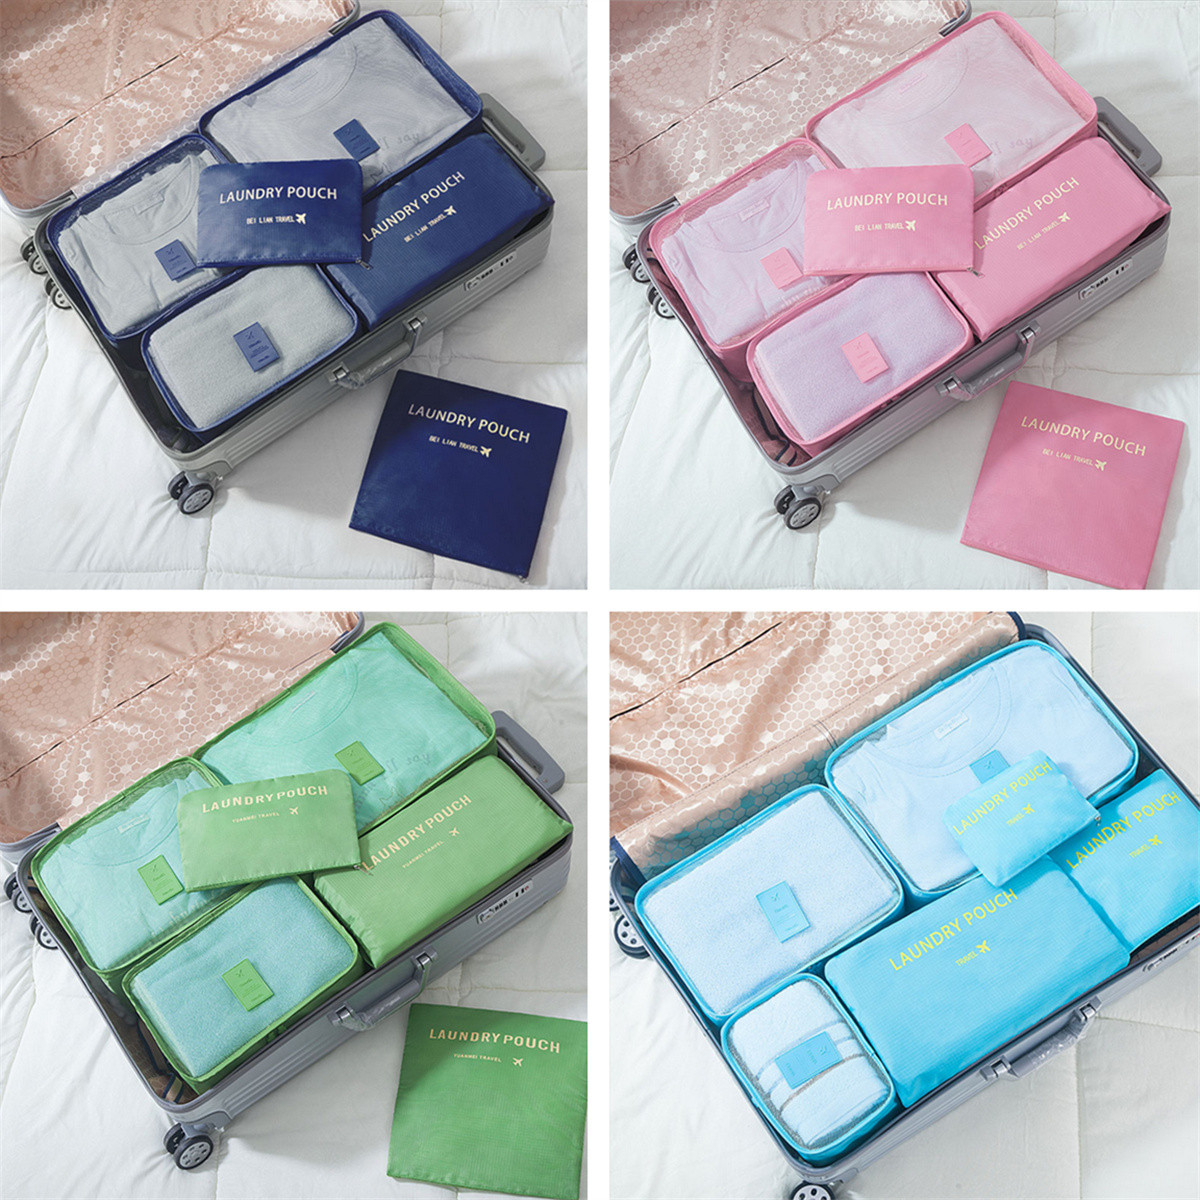 IPReetrade-6Pcs-Travel-Portable-Storage-Bag-Set-Clothes-Packing-Luggage-Organizer-Waterproof-Pouch-1152893-5